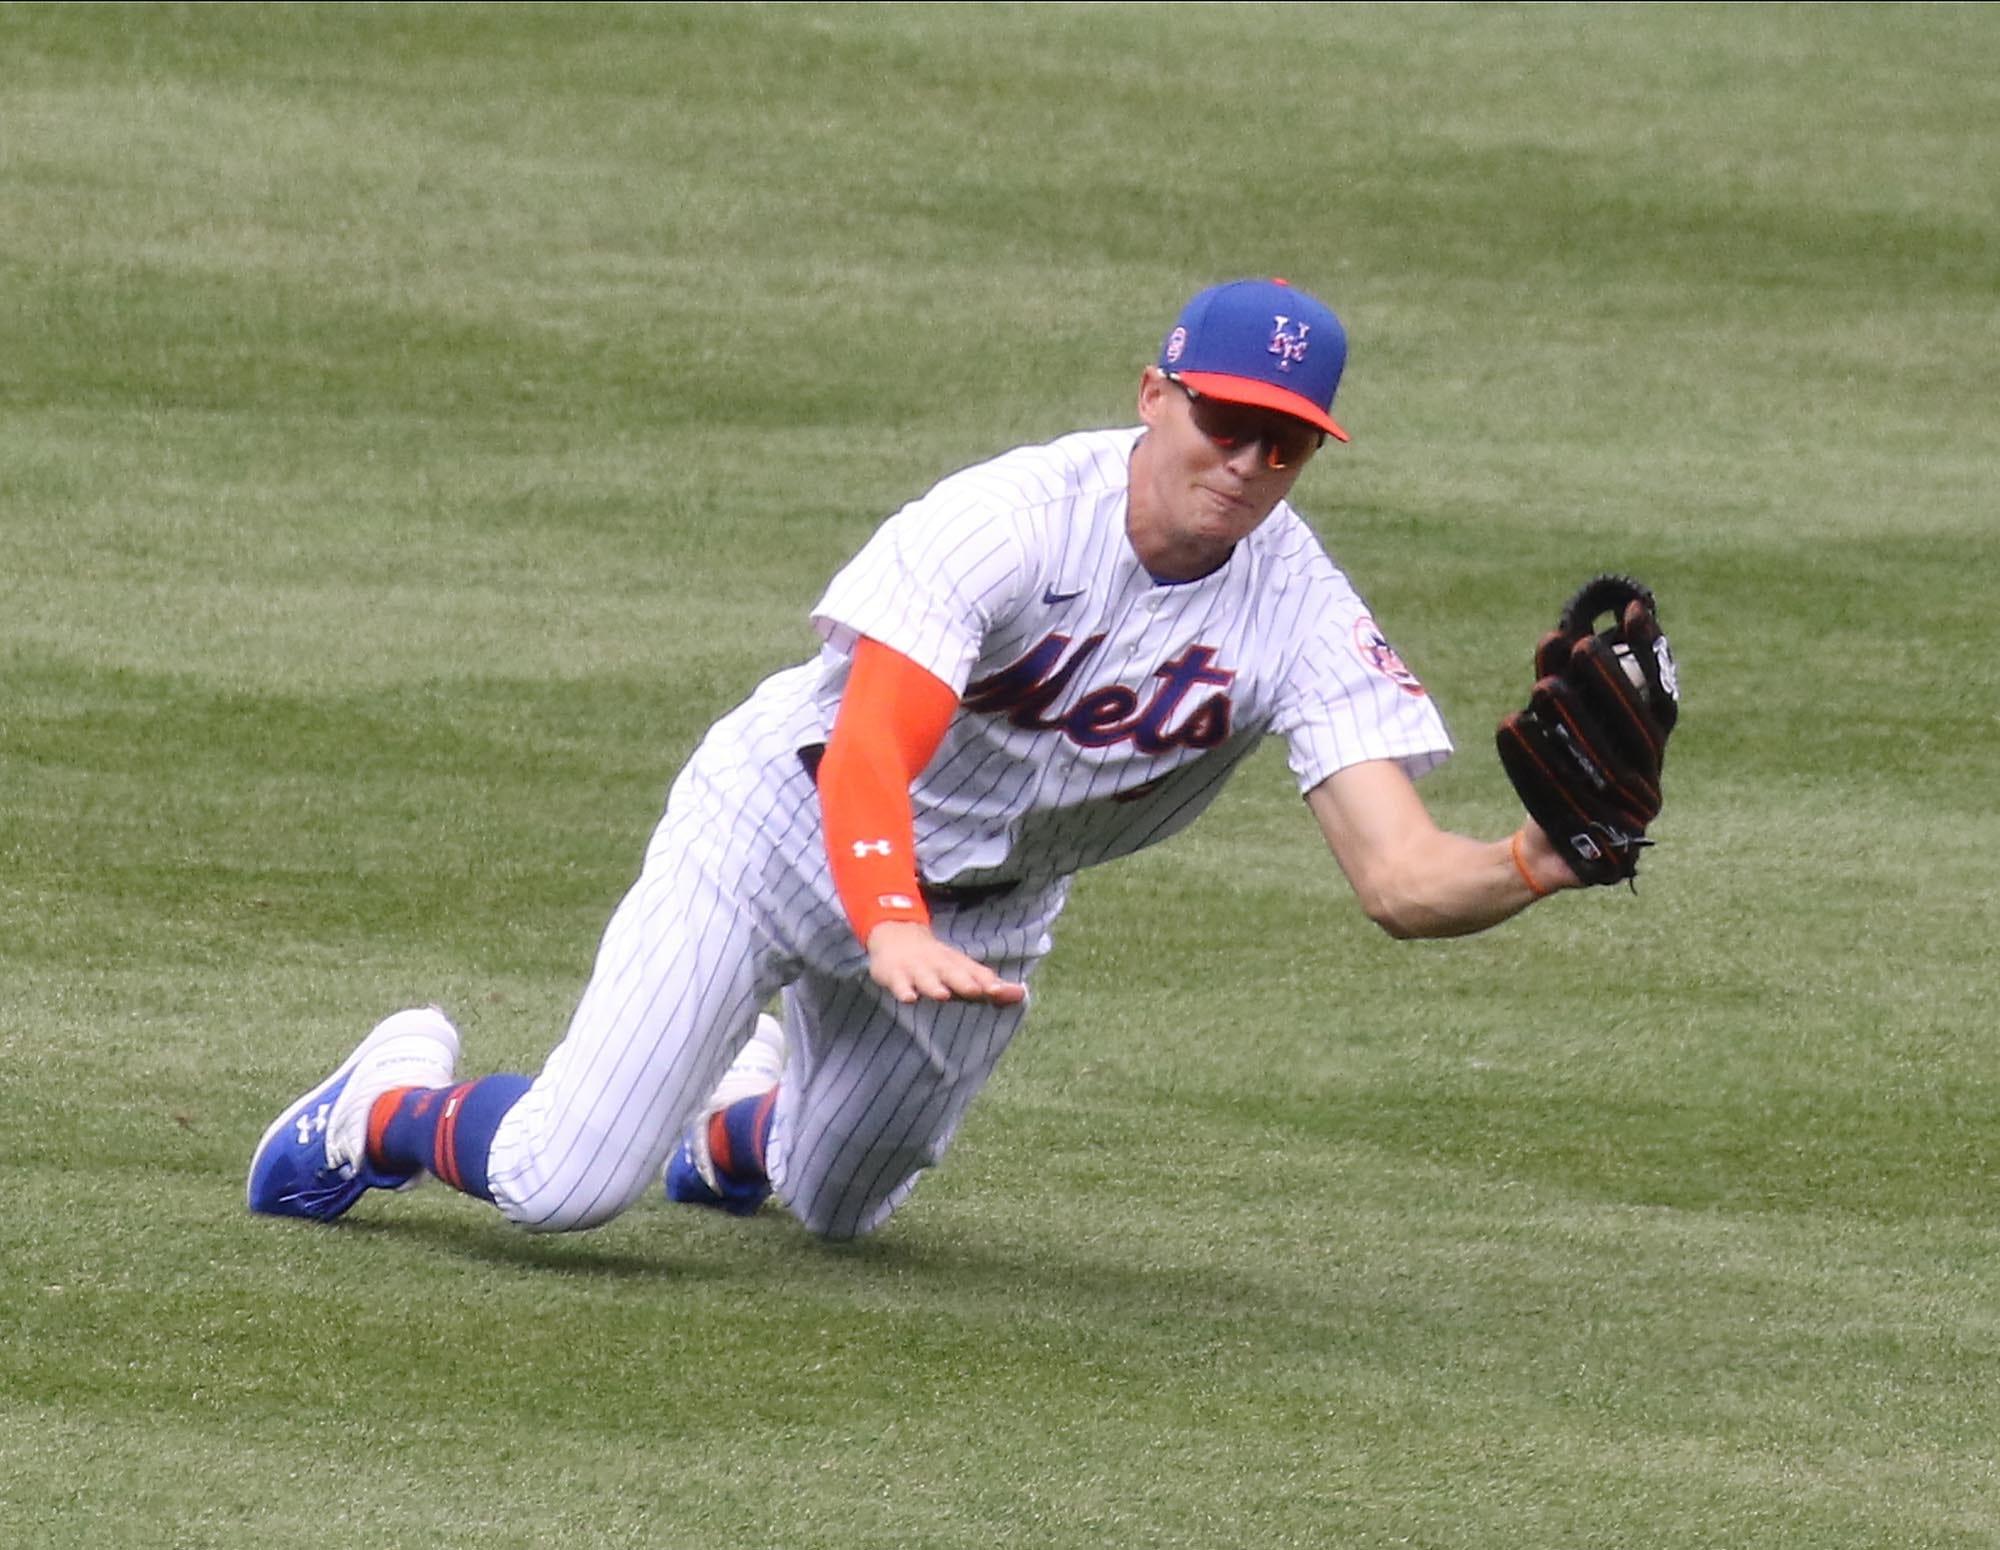 Brandon Nimmo makes this diving catch in centerfield during the Mets inter squad game at Citi Field on July 15, 2020 in preparation for the weekends exhibition games against the New York Yankees. The New York Mets Workout At Citi Field On July 15 2020 In Preparation For The Weekends Exhibition Games Against The New York Yankees / Chris Pedota, NorthJersey.com via Imagn Content Services, LLC